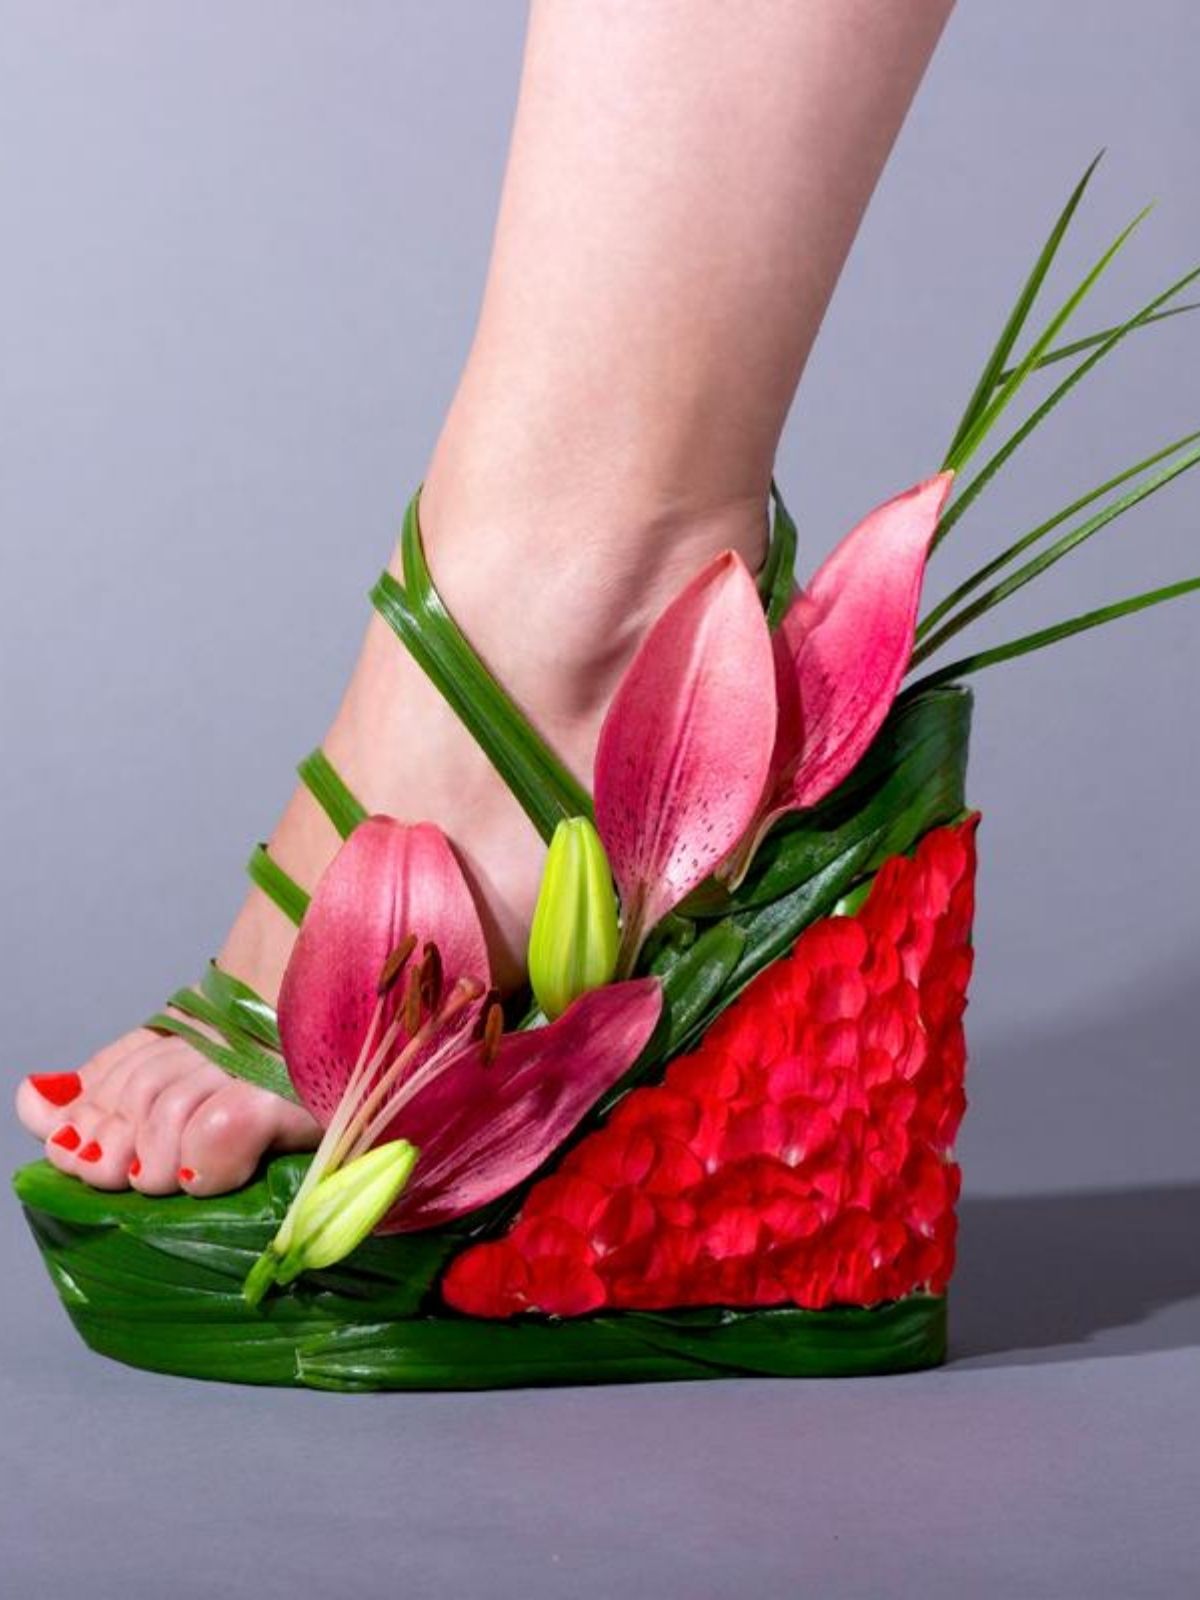 Make a Fashion Statement With These Unique Green Slippers - lily shoes - Pantoufle de Vert article on thursd